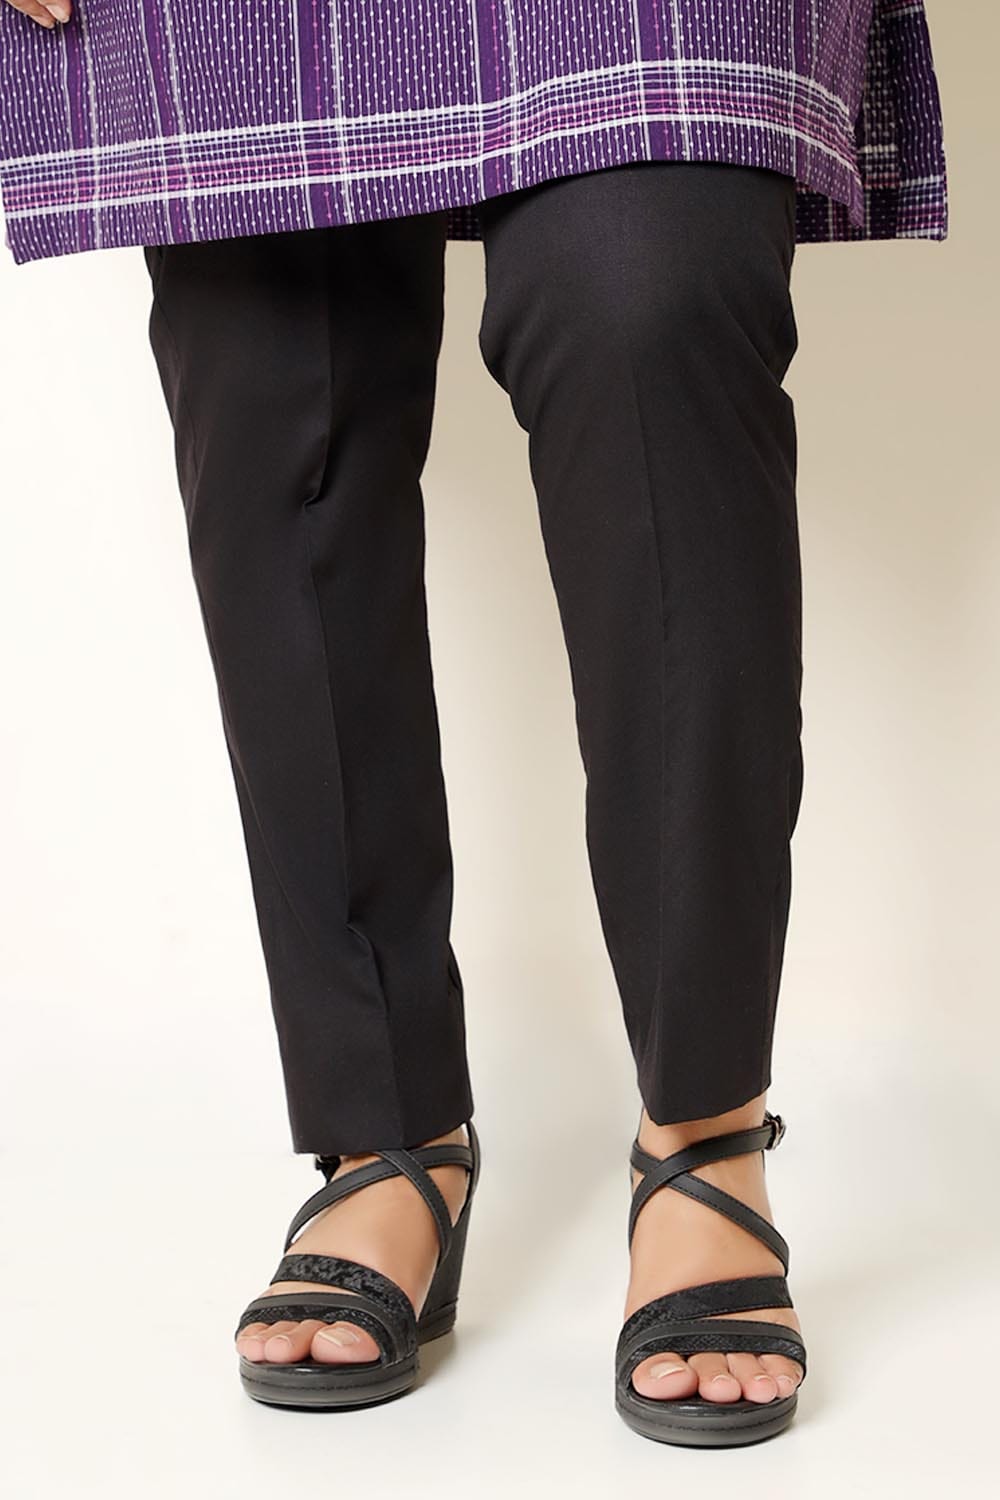 Hope Not Out by Shahid Afridi Eastern Women Trousers Woman Black Basic Trouser Flora